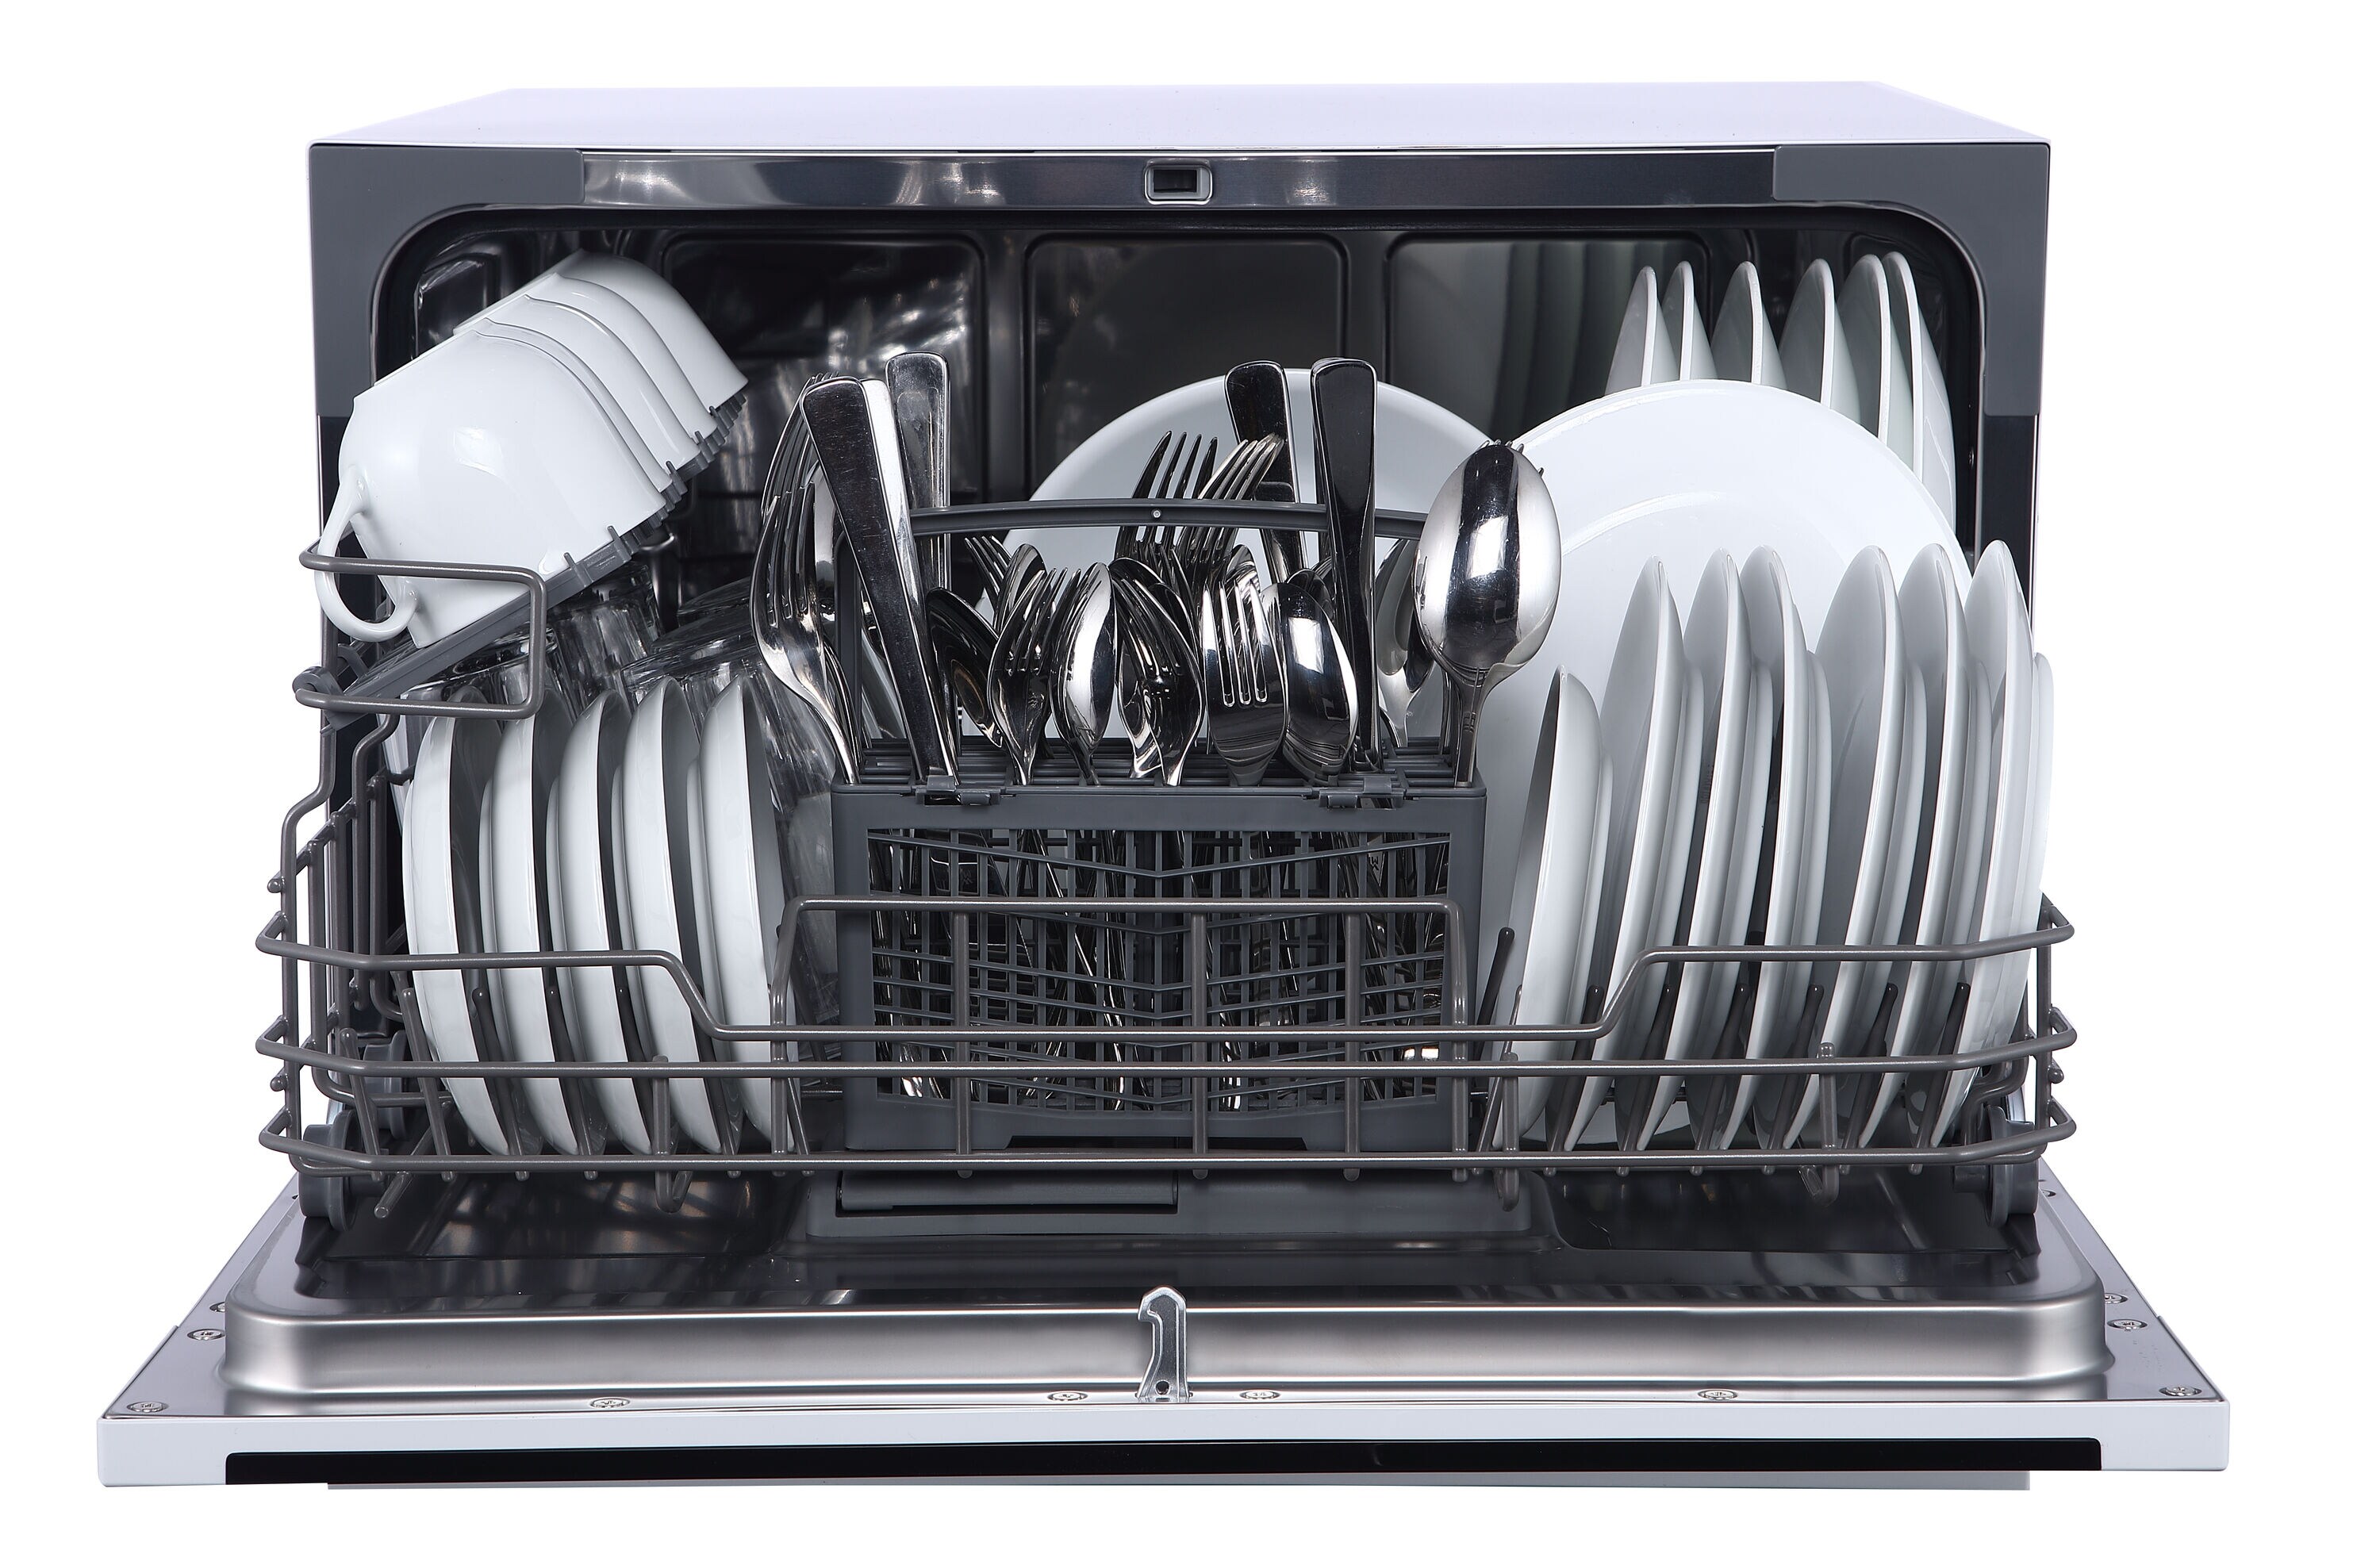 Farberware FCDMGDWH Complete Portable Countertop Dishwasher with UV Light 2  Place Settings, 5 Wash Programs